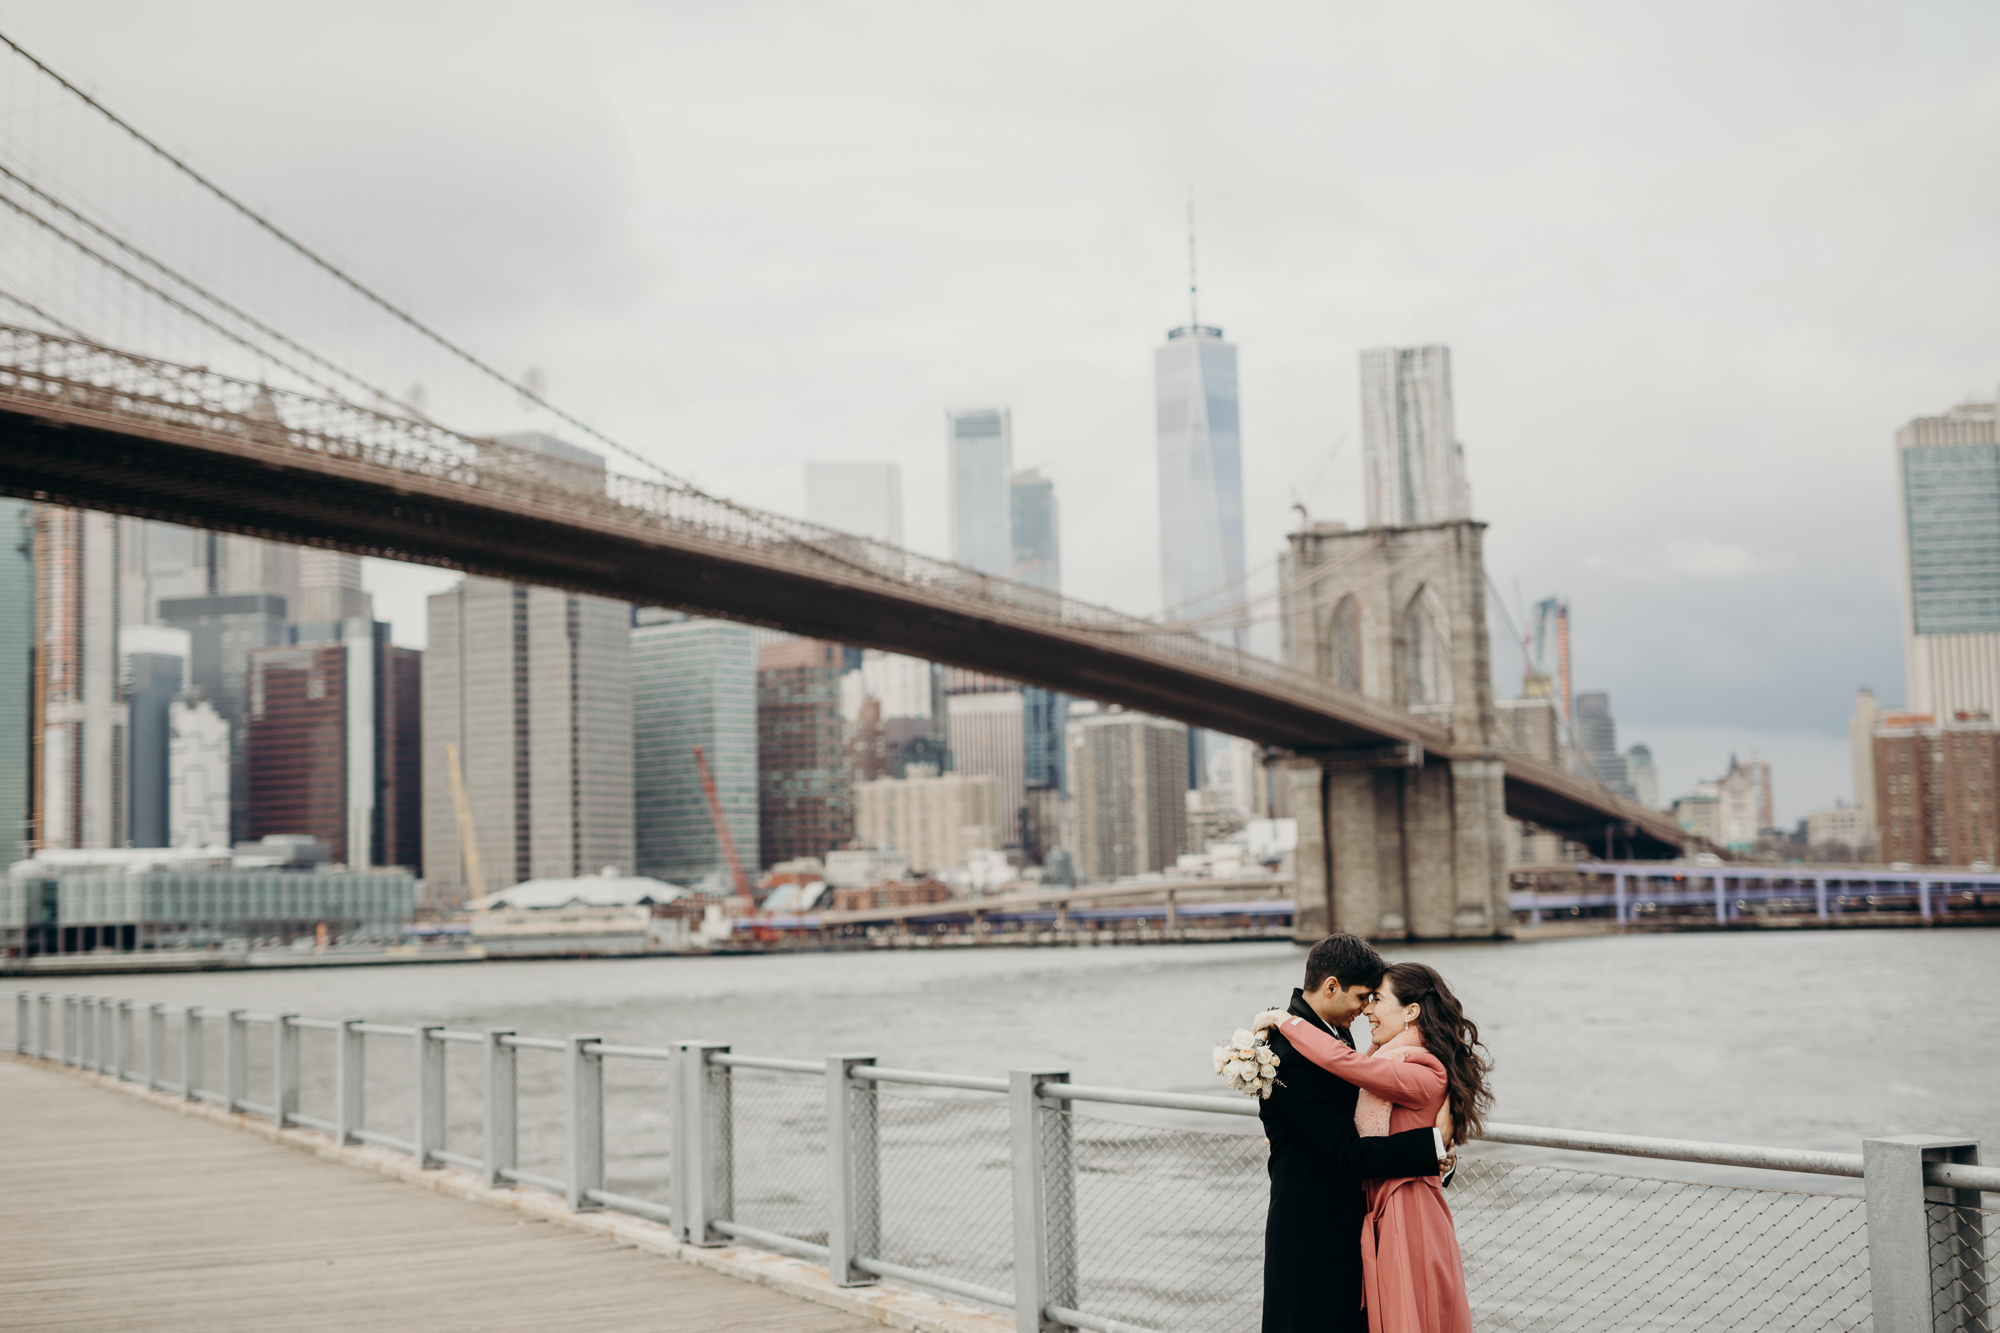 bride and groom portrait at dumbo in new york city, ny